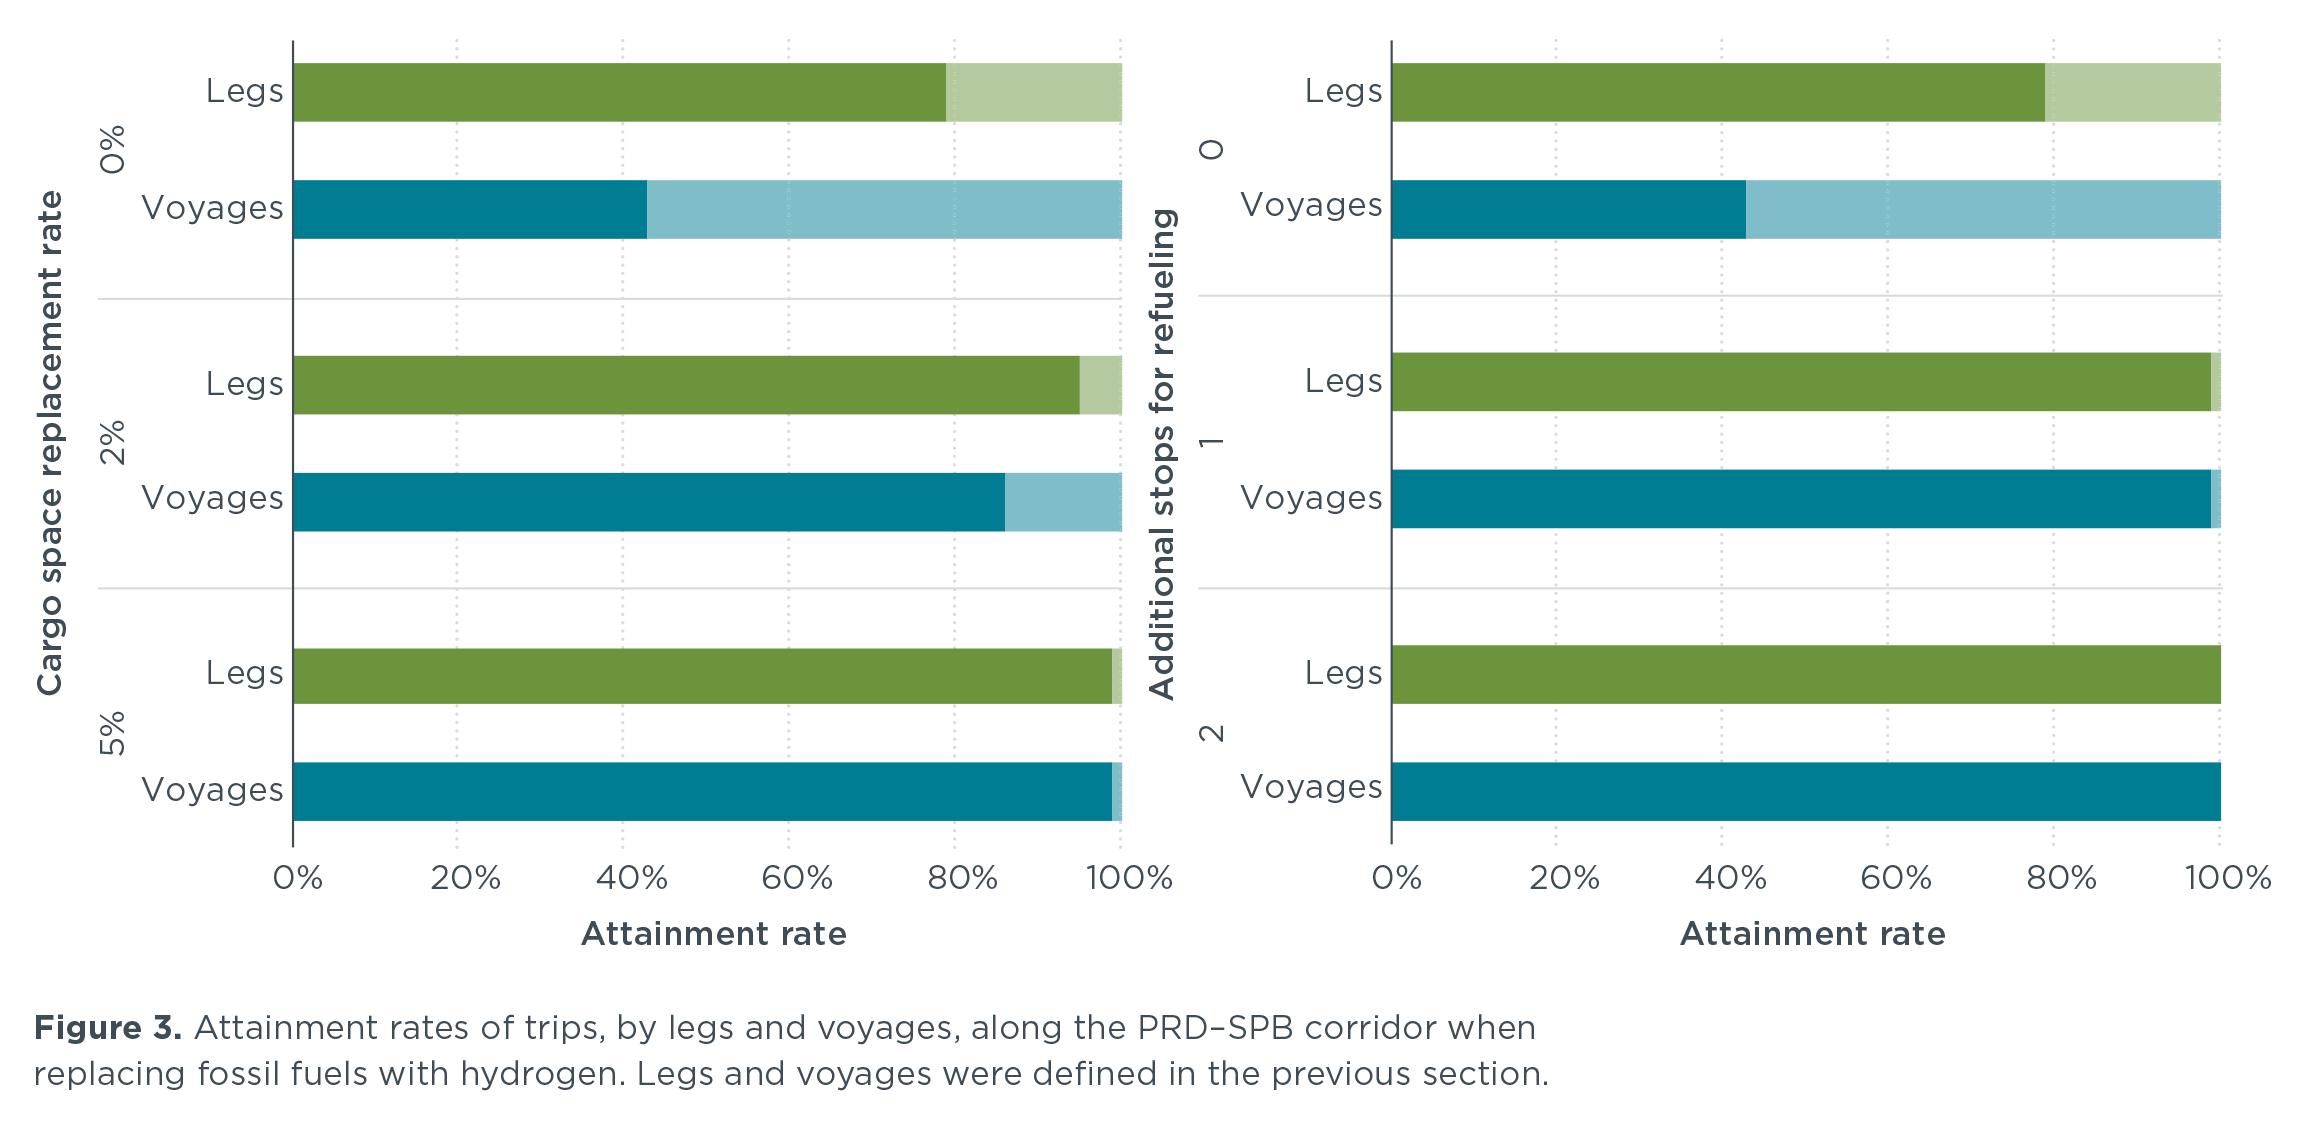 Figure 3. Attainment rates of trips, by legs and voyages, along the PRD-SPB corridor when replacing fossil fuels with hydrogen